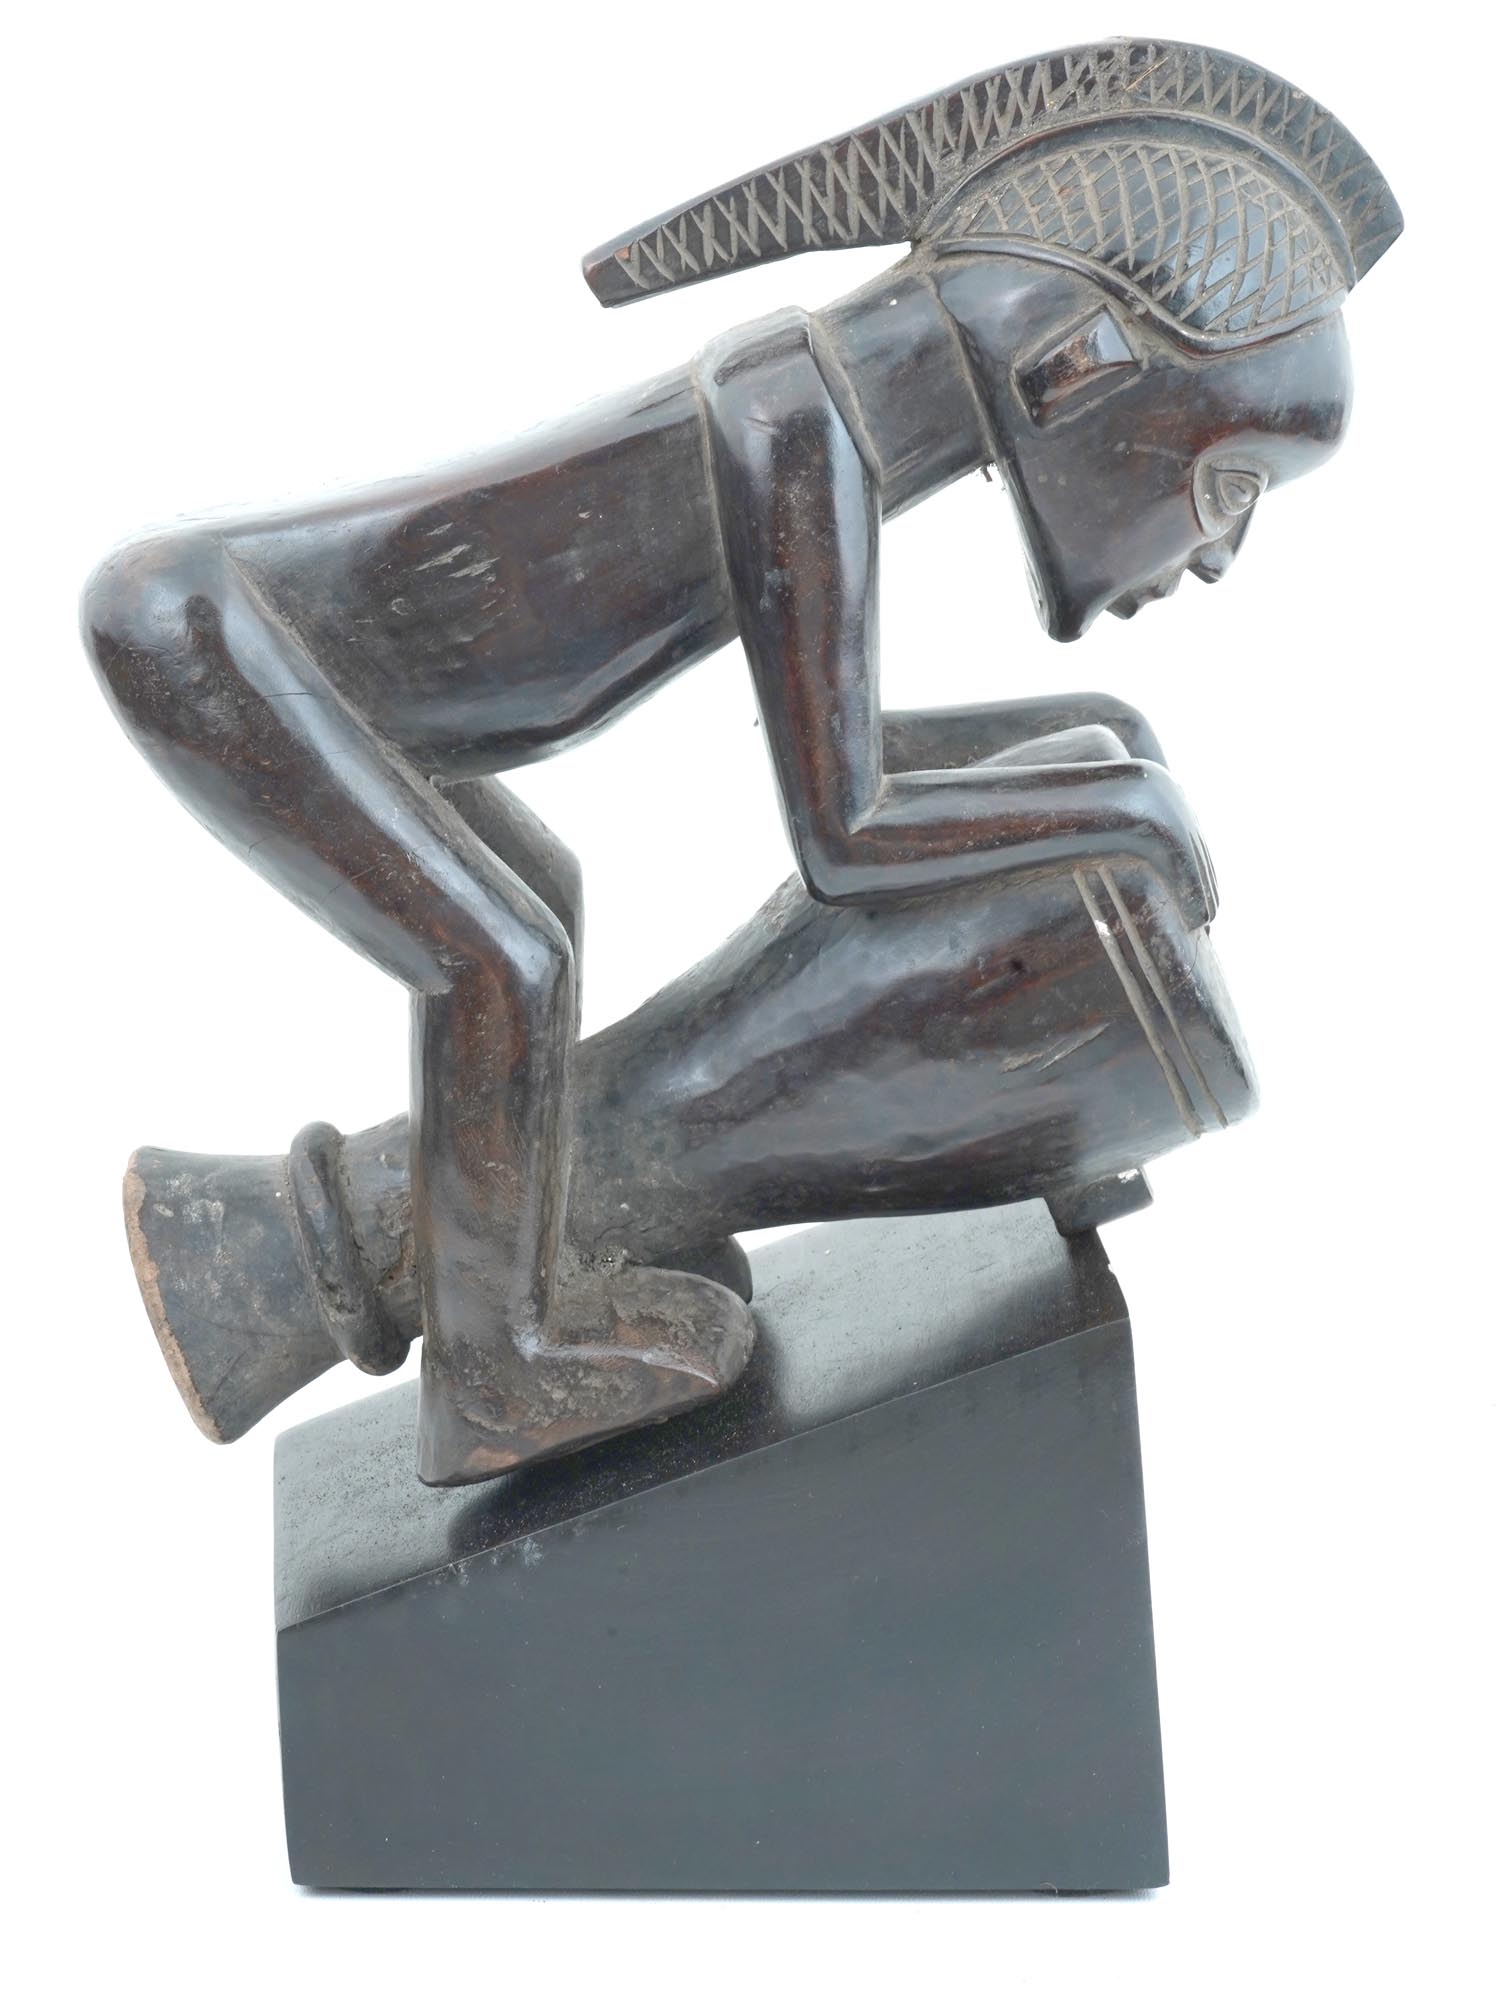 EARLY 20TH C MBALA CONGO CENTRAL AFRICAN FIGURINE PIC-2